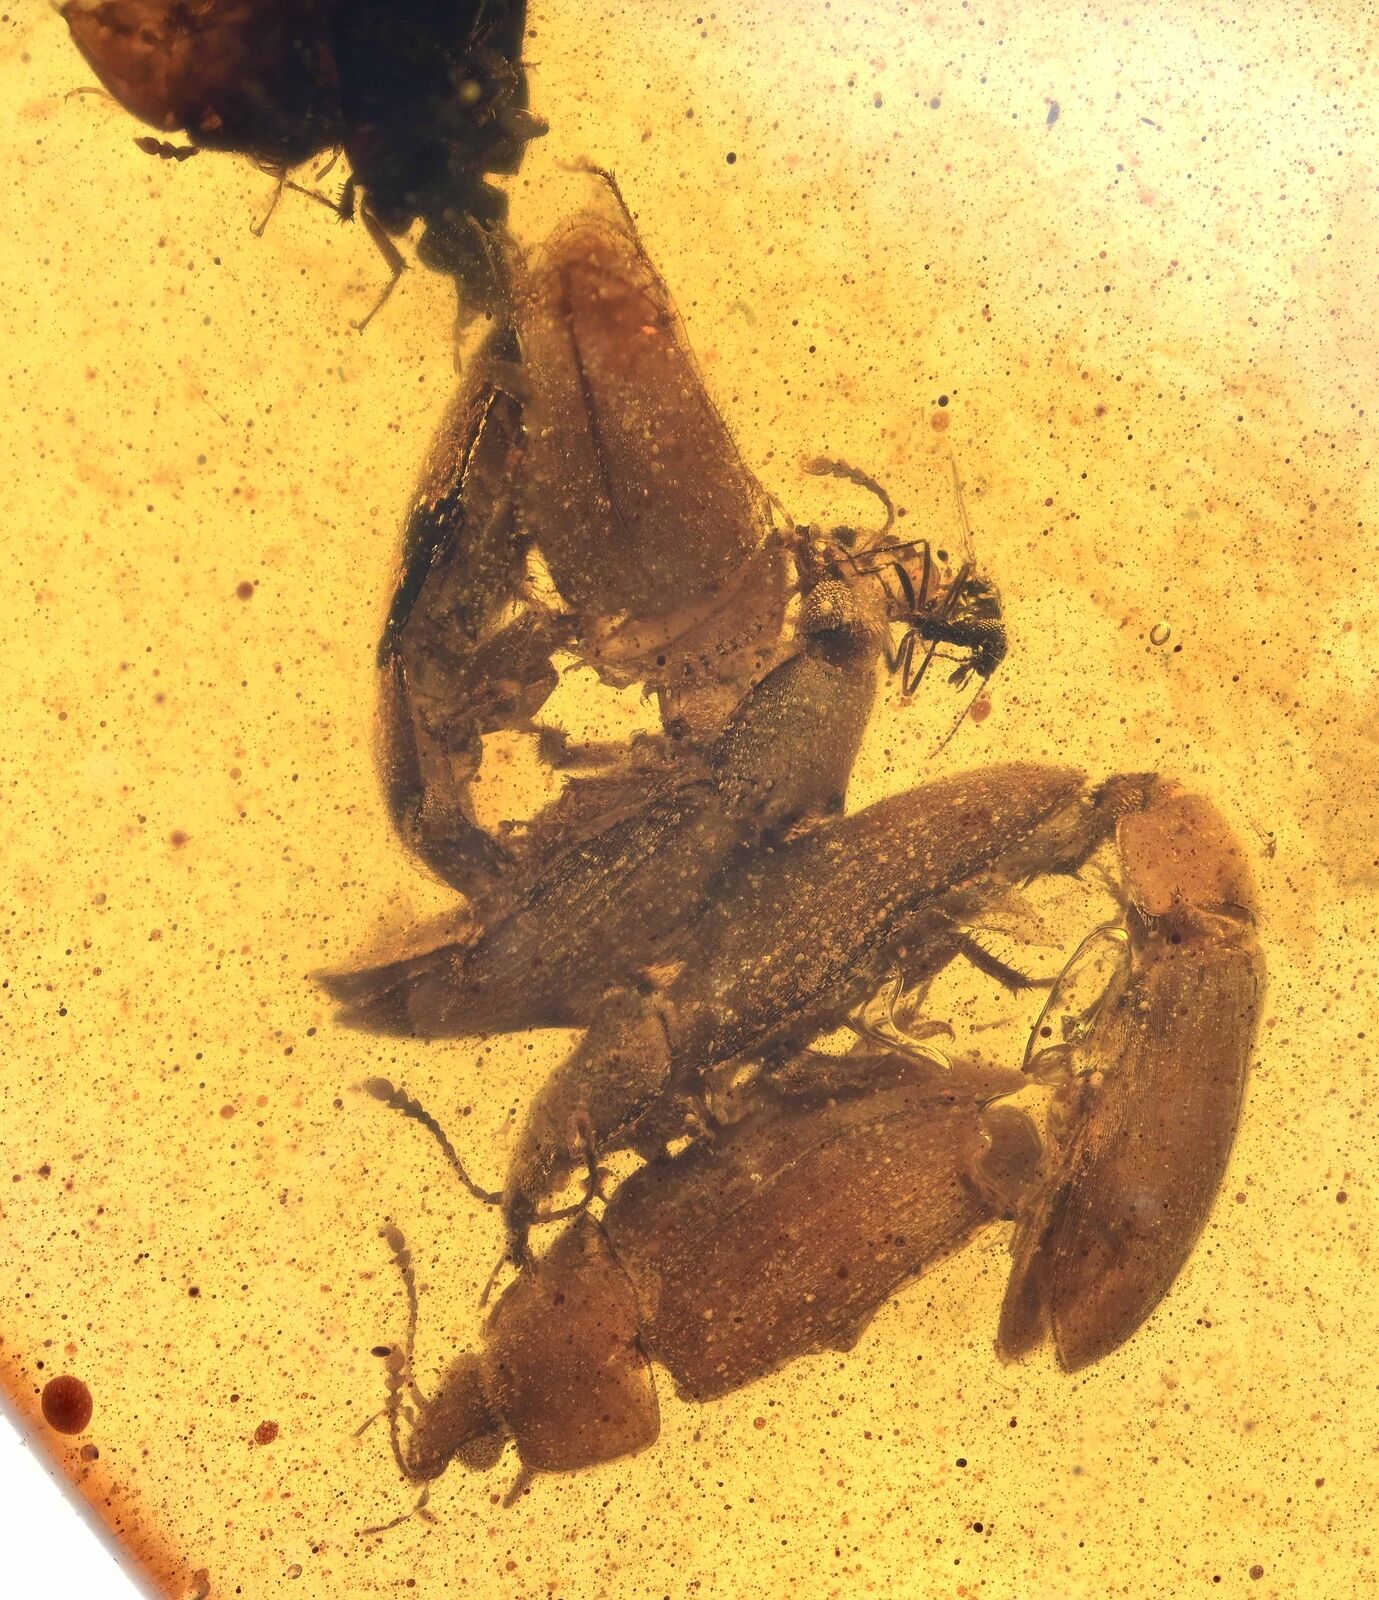 Rare Swarm of Beetles, Fossil Inclusion in Burmese Amber